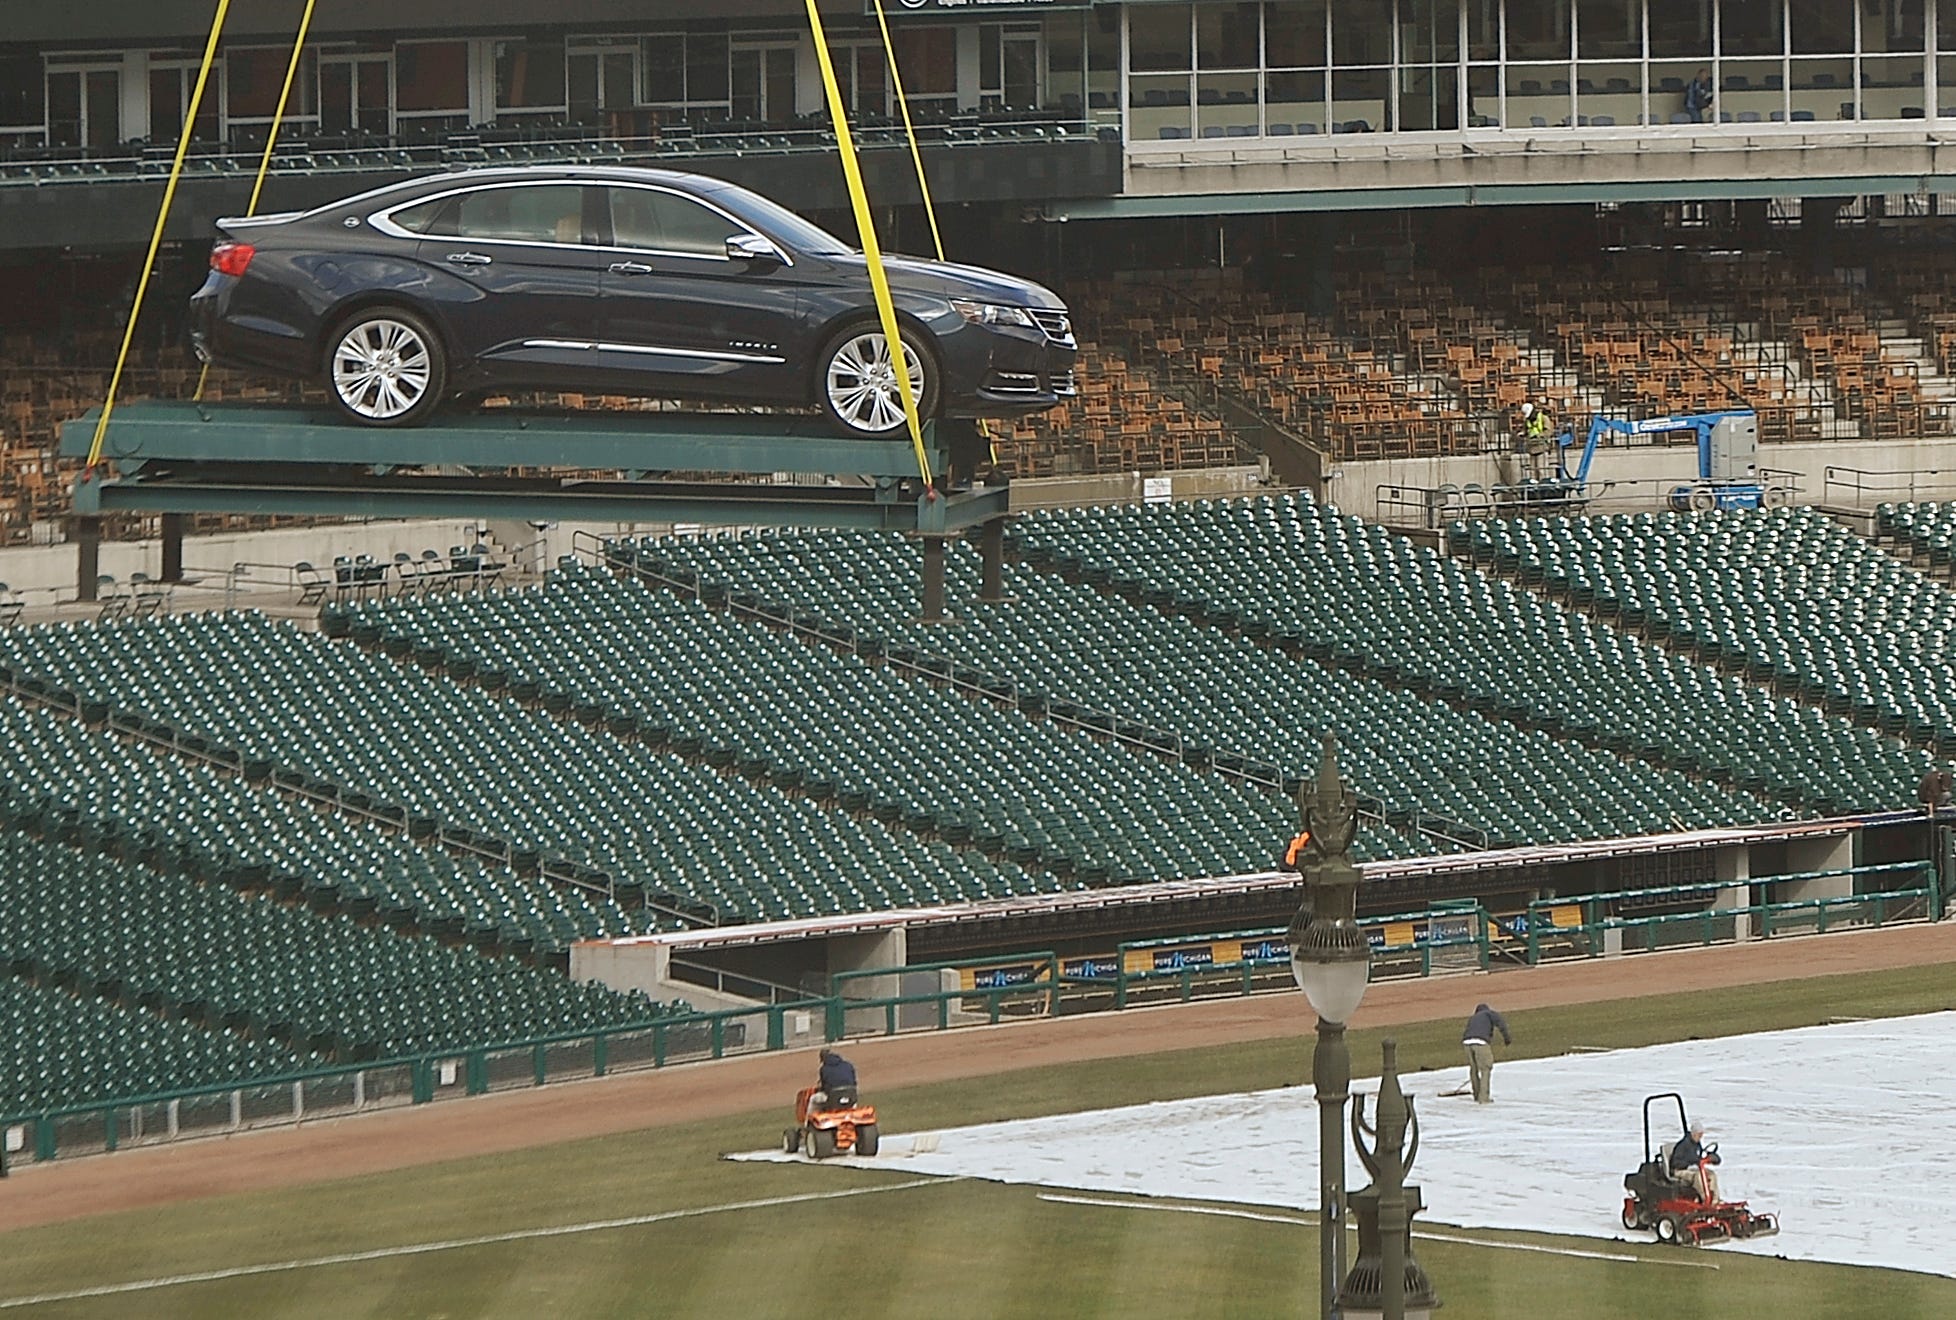 A 2014 Impala is lifted to the top of the Chevrolet fountain at Comerica Park in Detroit on April 1, 2013.